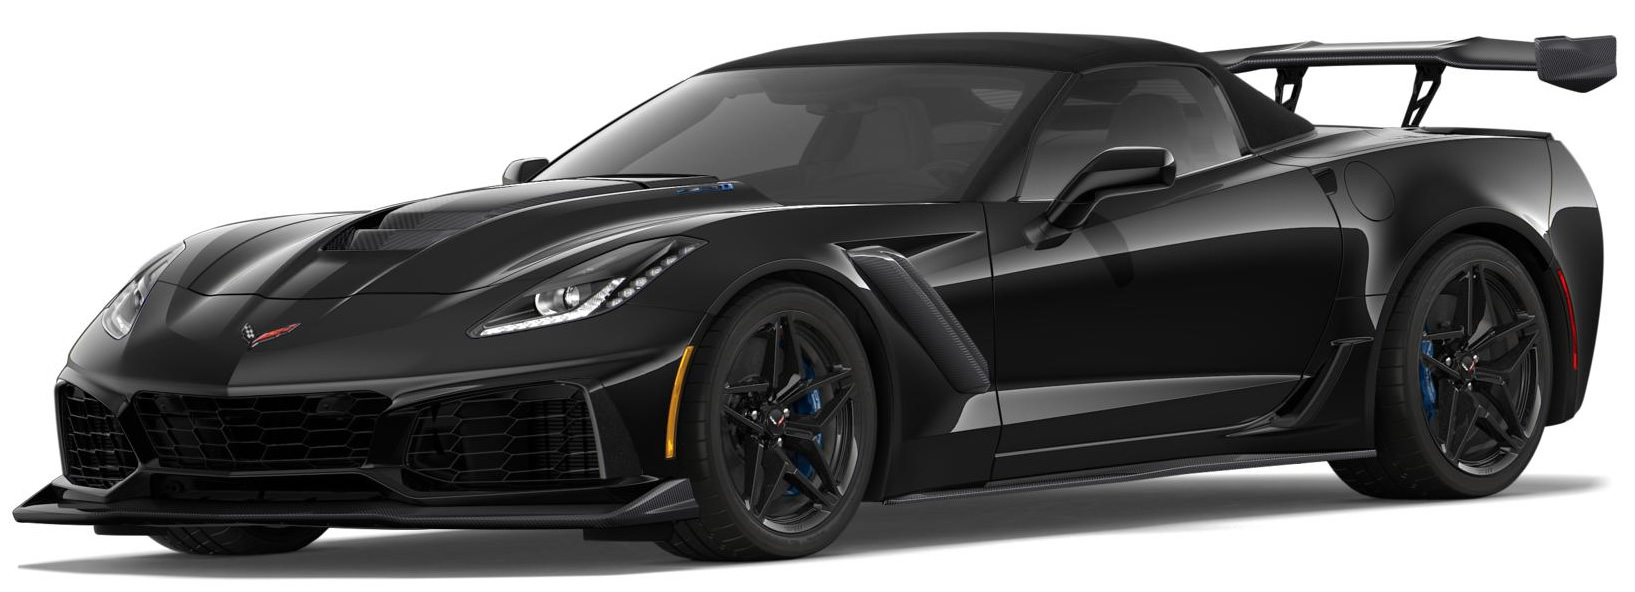 2019 Corvette ZR1 Convertible in Black with the ZTK Track Performance Package